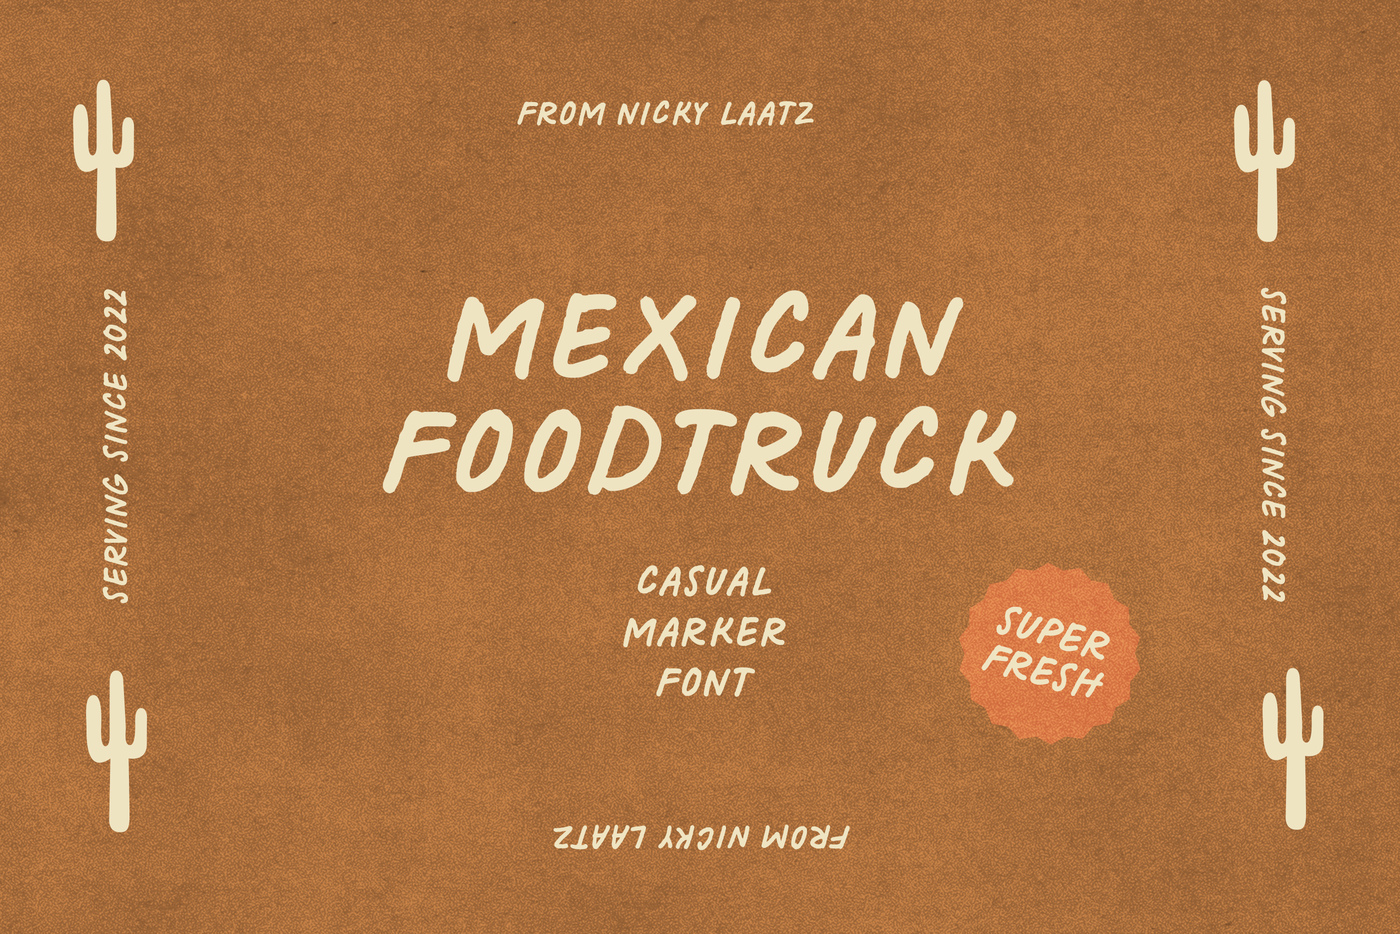 Mexican Foodtruck Font main product image by Nicky Laatz